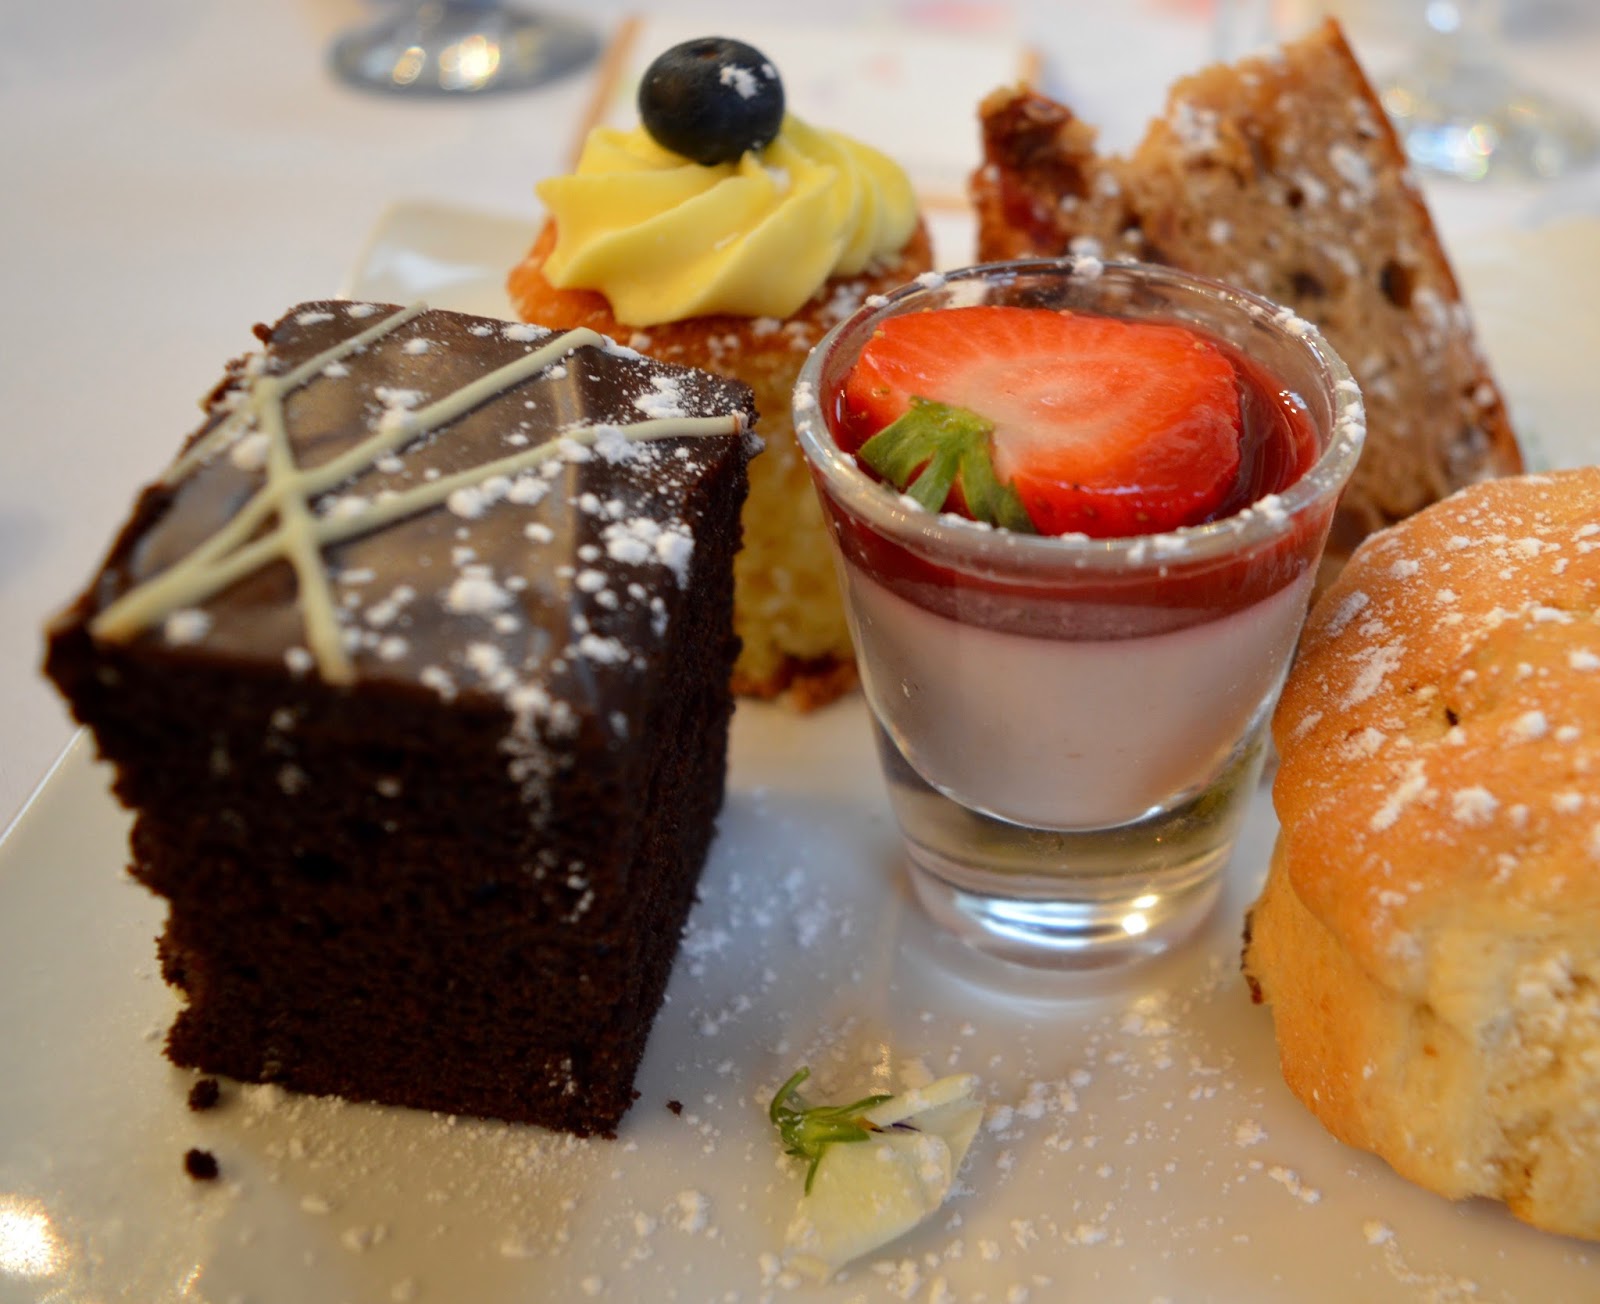 Weddings at The Parlour at Blagdon in Northumberland - Afternoon Tea Wedding Breakfast Cakes and Scone